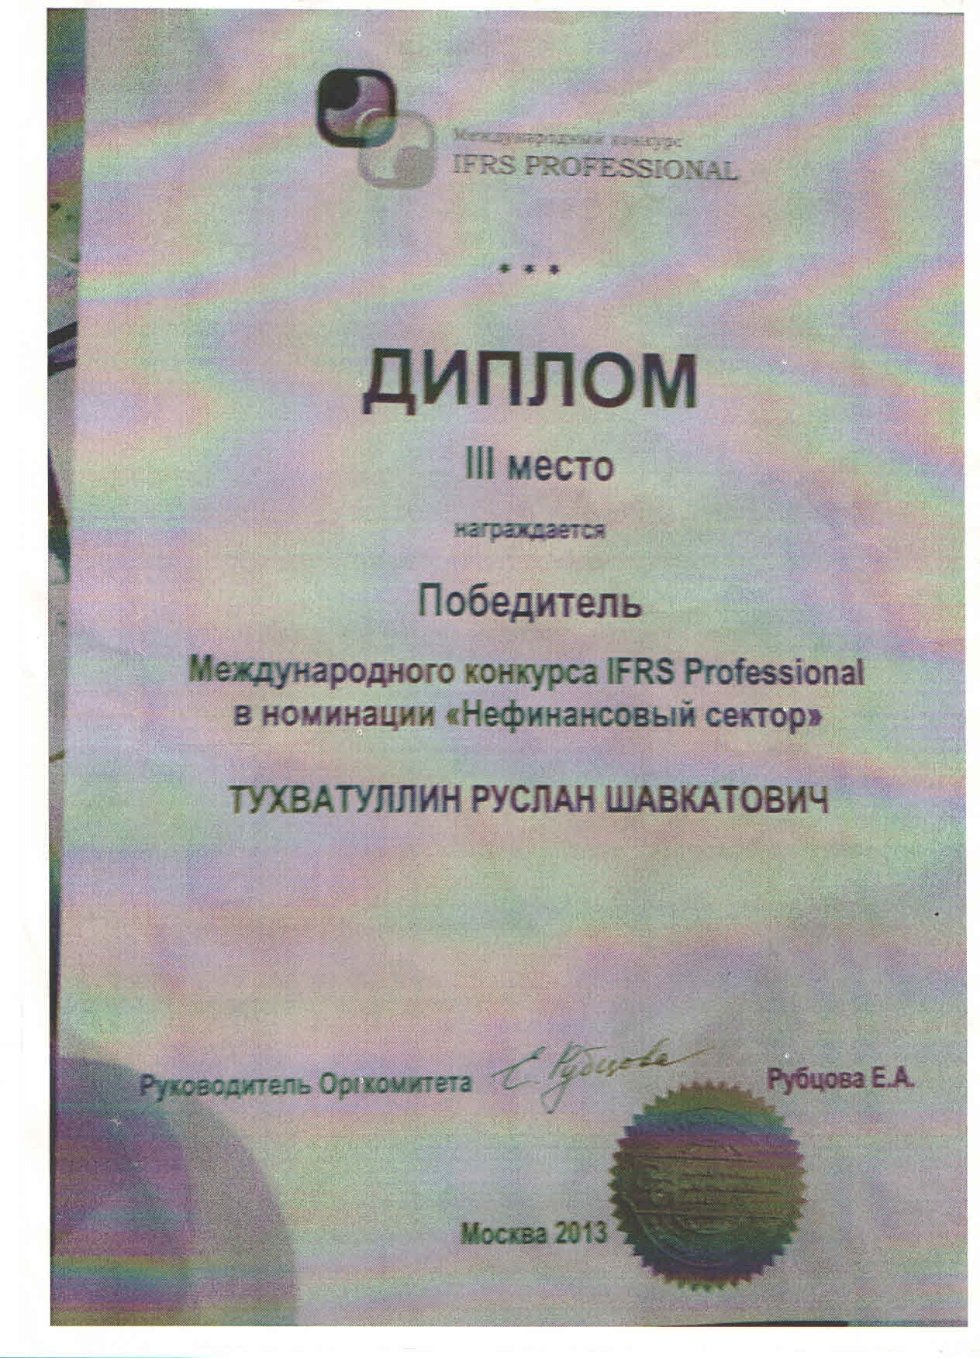      'IFRS Professional'        ,,    ,   